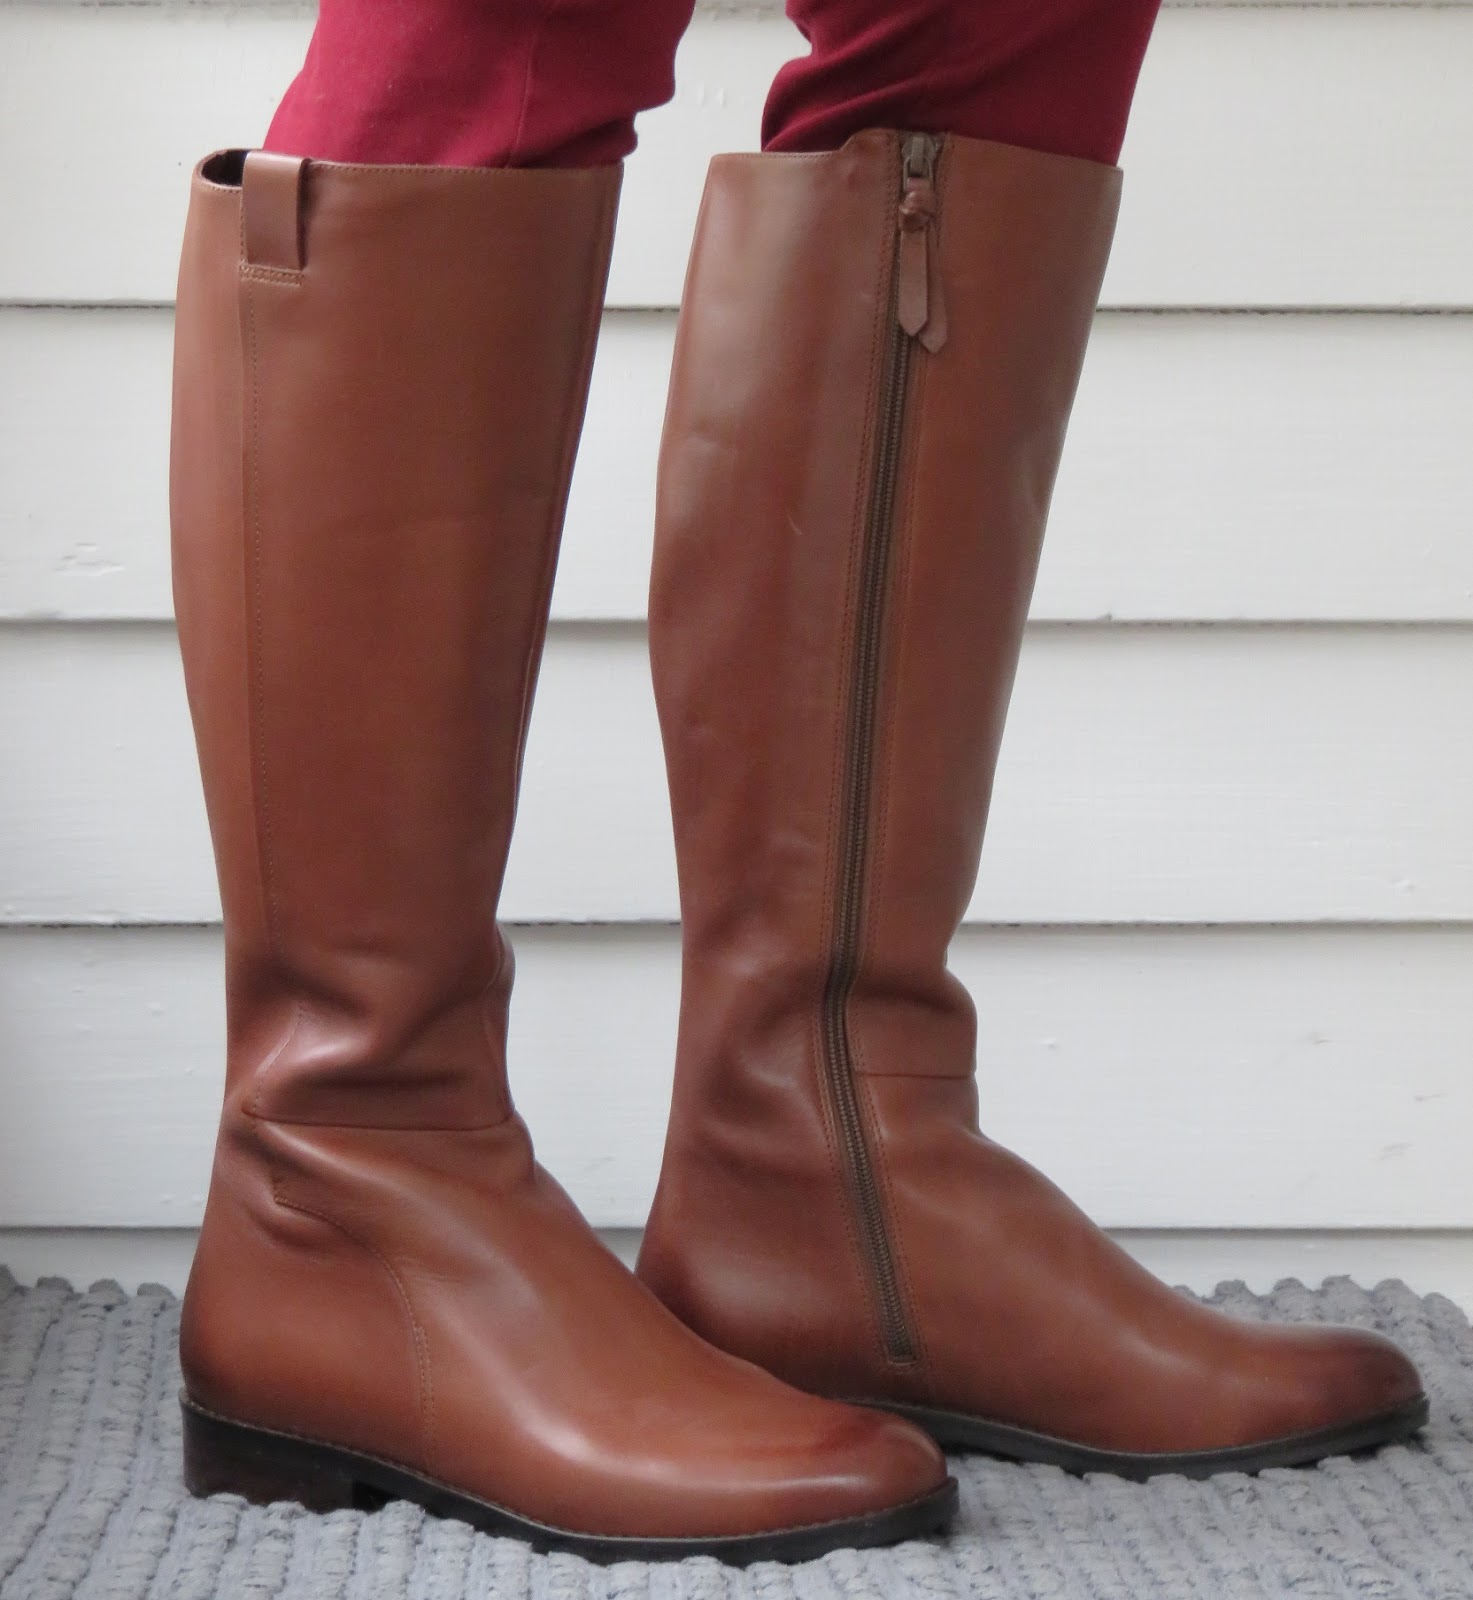 skinny calf riding boots